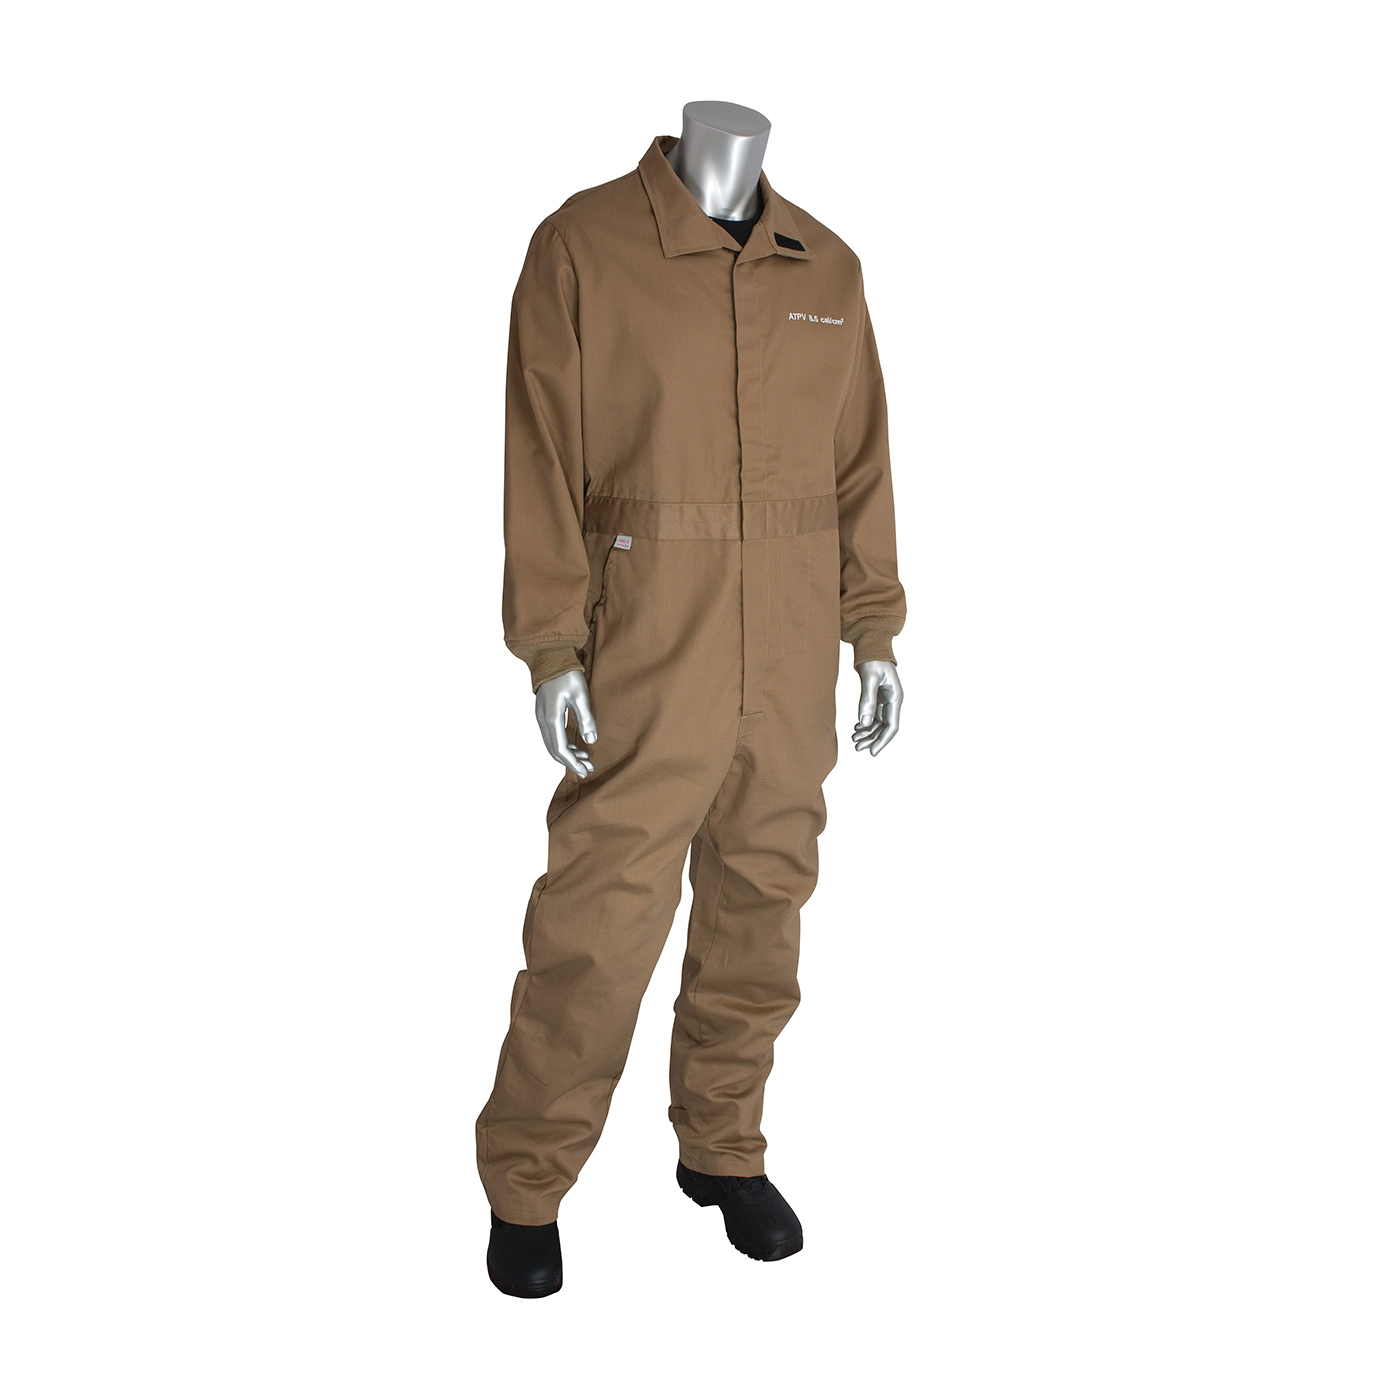 PIP® 9100-2100D/M Flame Resistant Coverall With Vented Back, M, Khaki, 90% Cotton/10% Nylon/FR Twill Weave, 40 to 42 in Chest, 32 in L Inseam